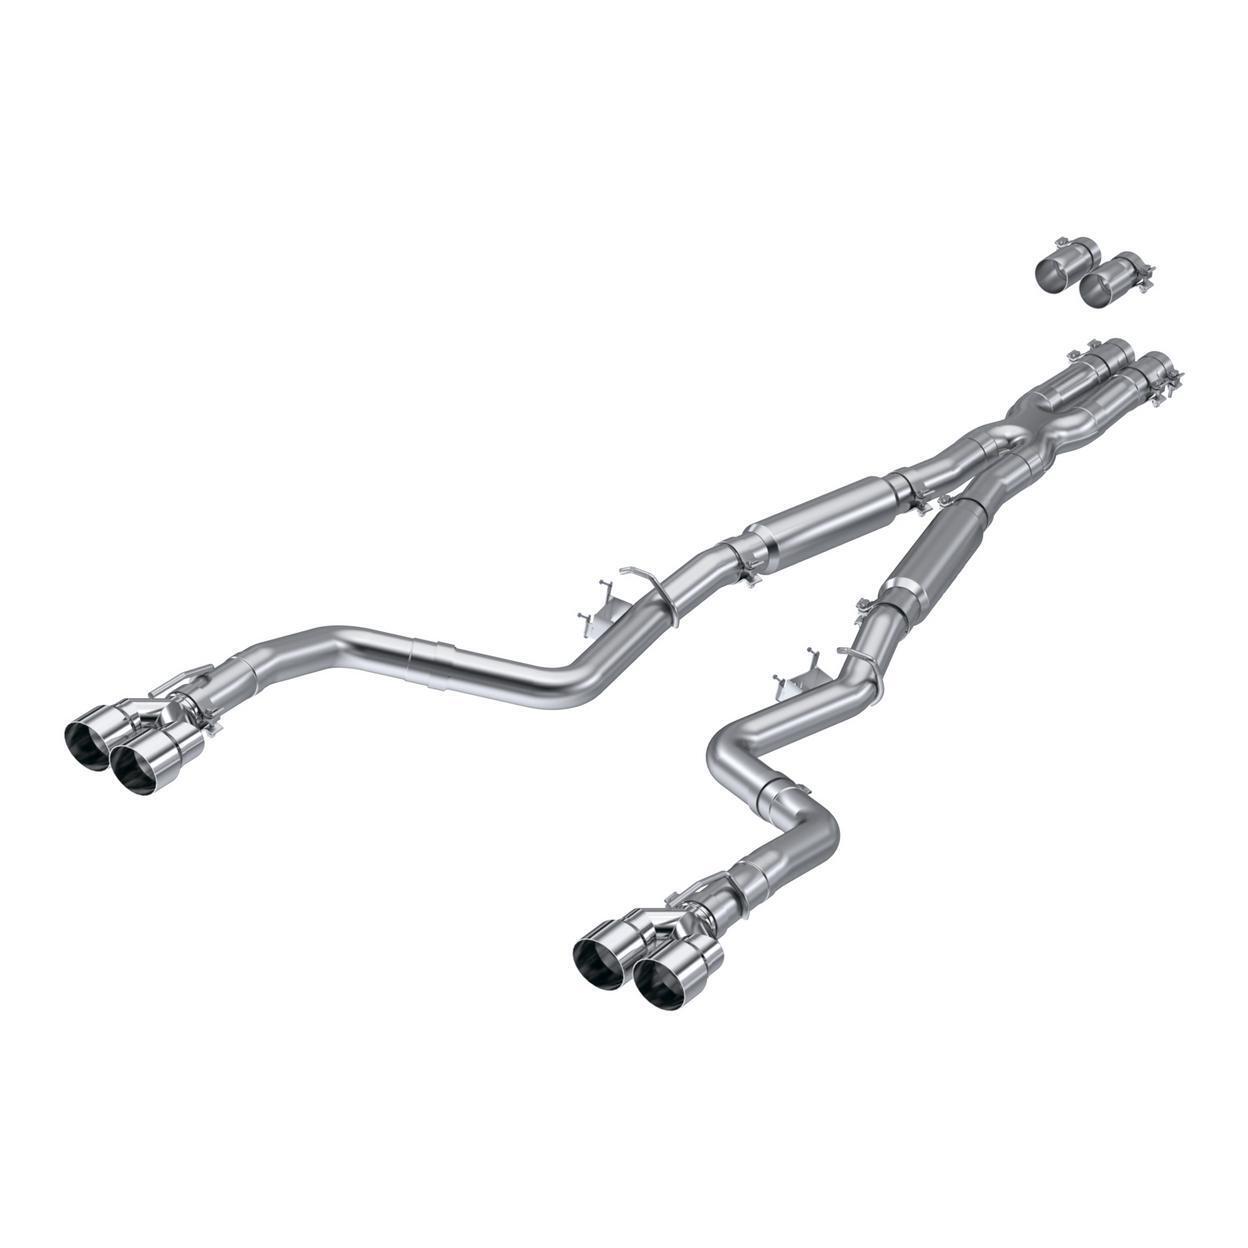 MBRP Exhaust S7113AL-DL Exhaust System Kit for 2015 Dodge Challenger